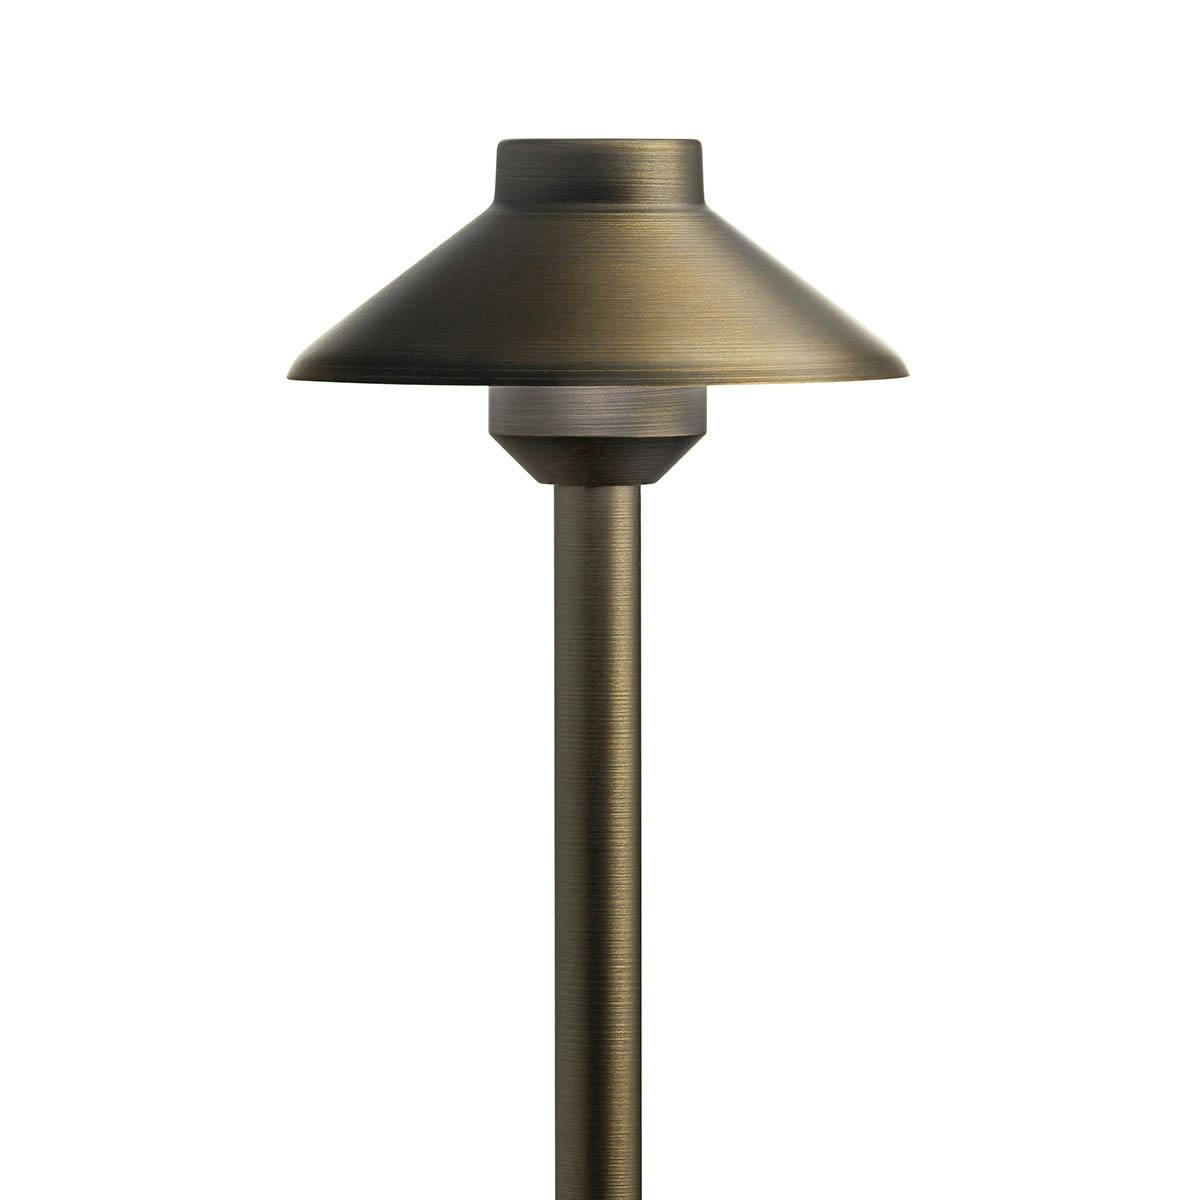 Short Stepped Dome 3000K Path Light Brass on a white background